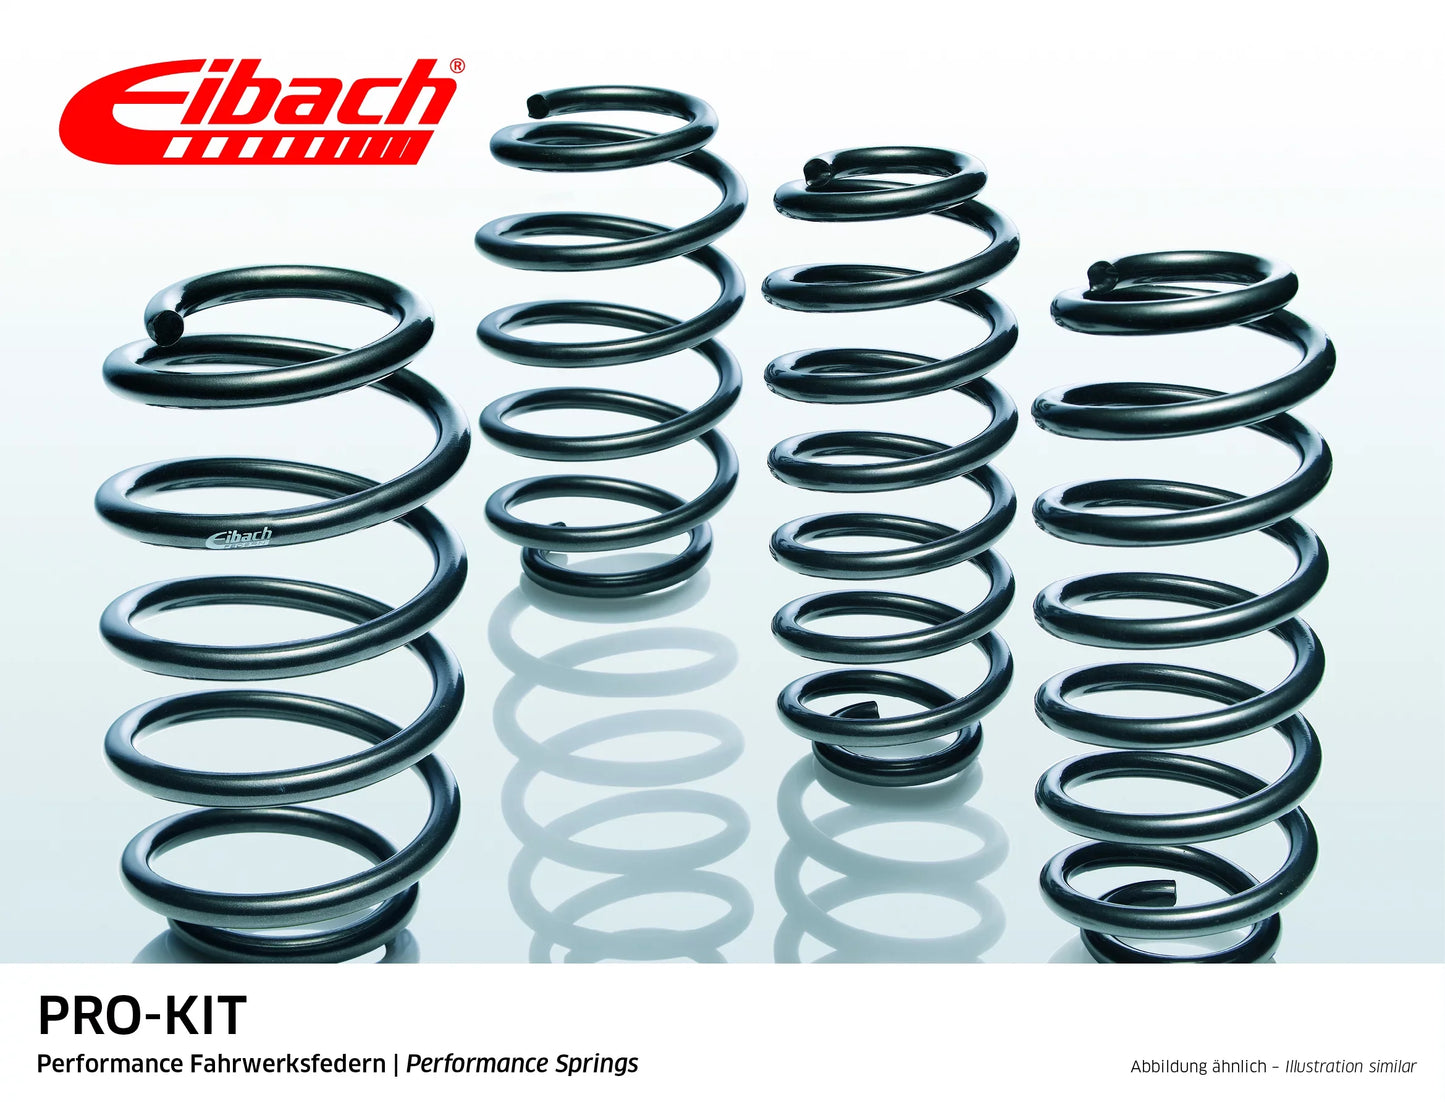 Eibach Pro-Kit Lowering Springs (E10-49-004-02-22) at £244.80